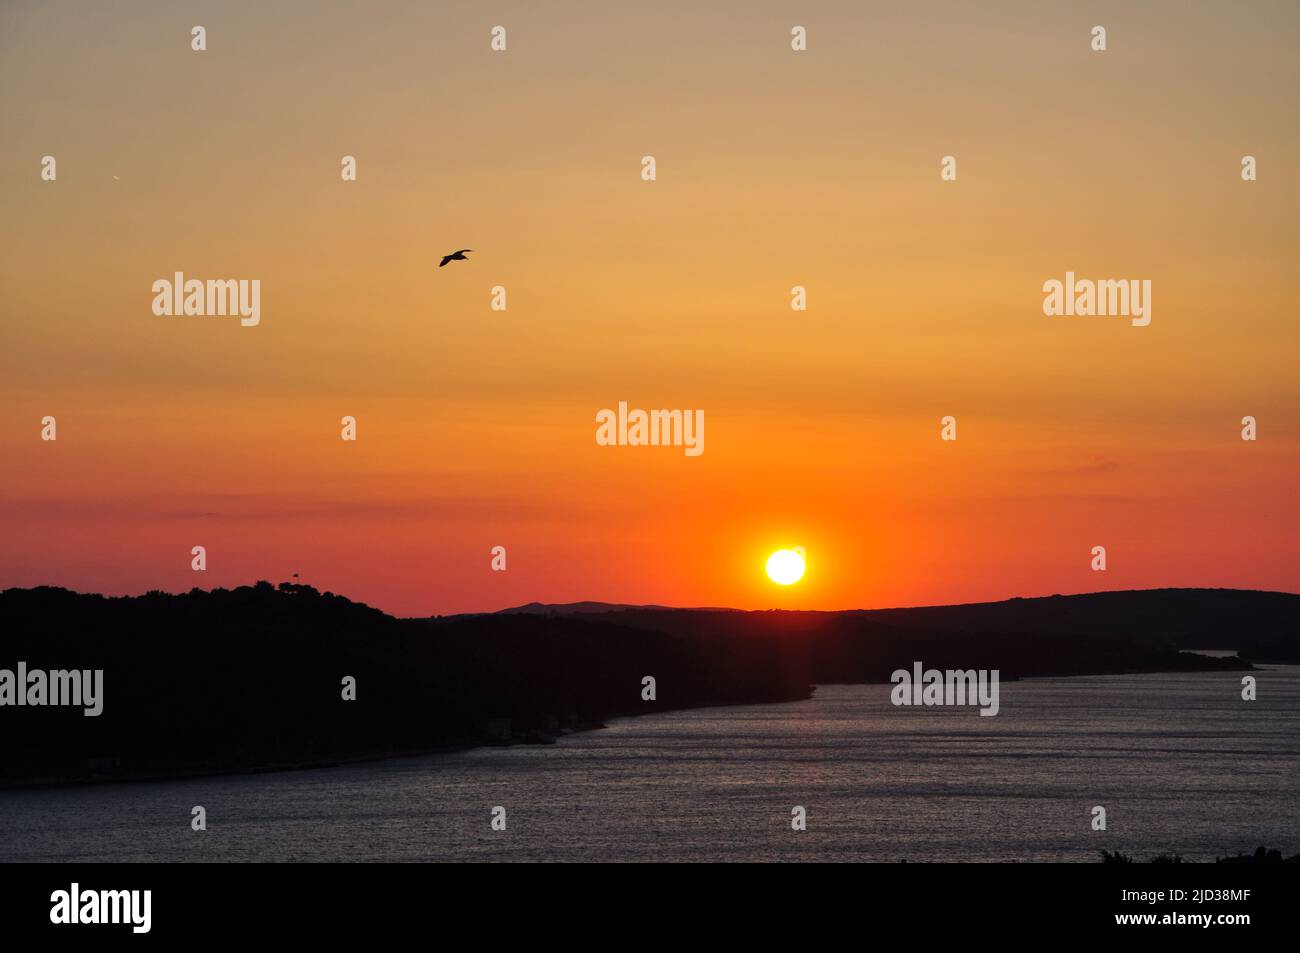 Red Sunset seagull silhouettes. Seagull in sunset sky. Flying seagulls over the sea at sunset. Seagulls at sea . Birds flying back home at sunset. Stock Photo